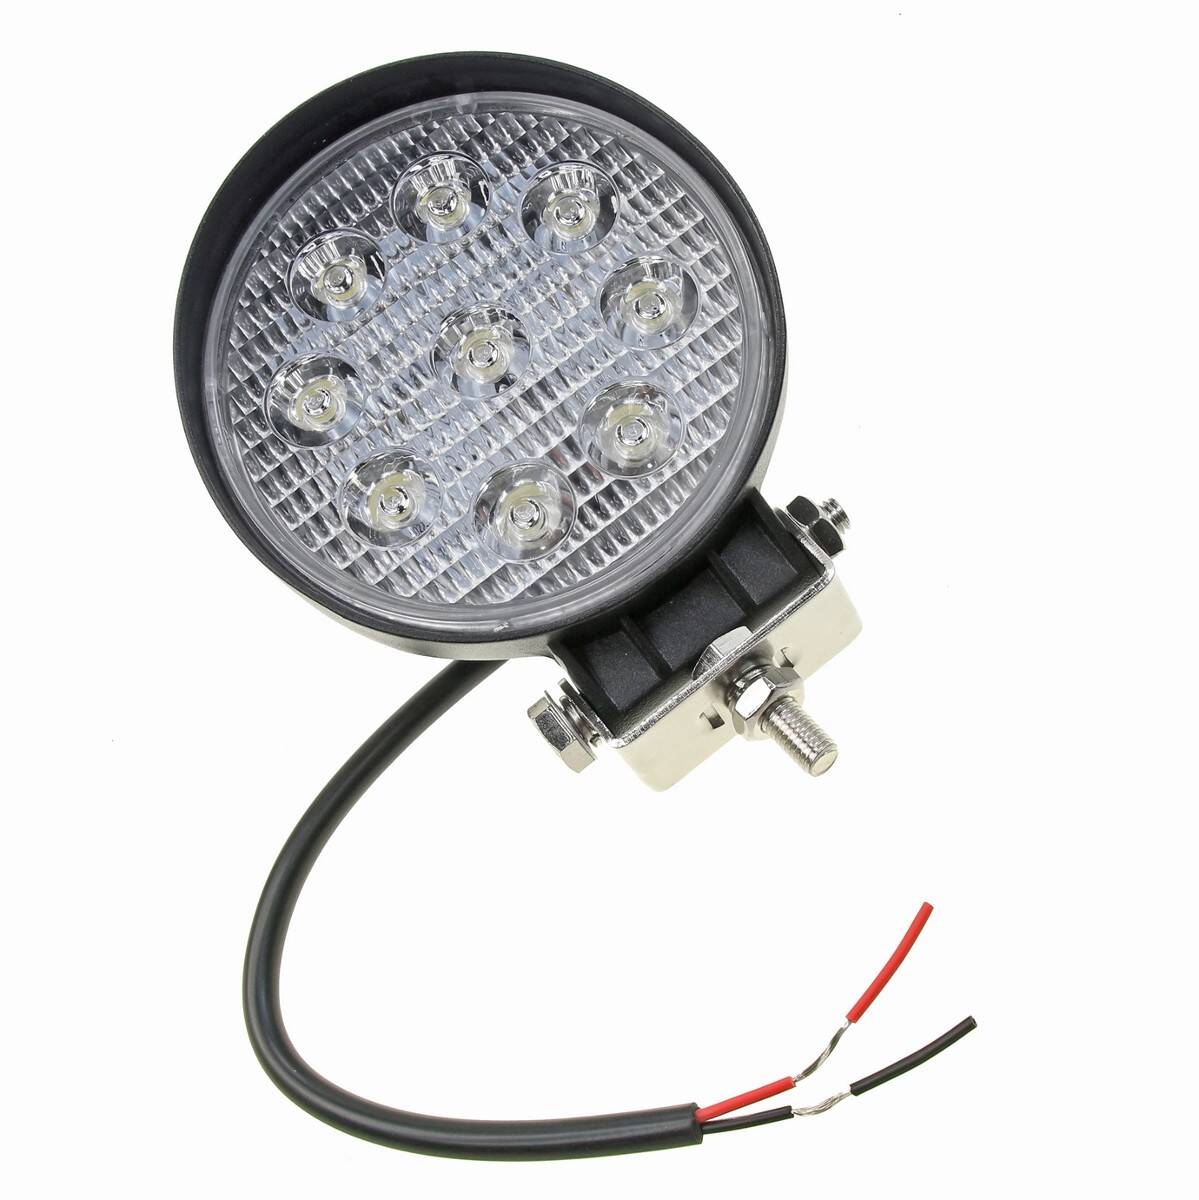 LED WORK LAMP 9X3W ROUND 2250 LM 35 MM HY-140D